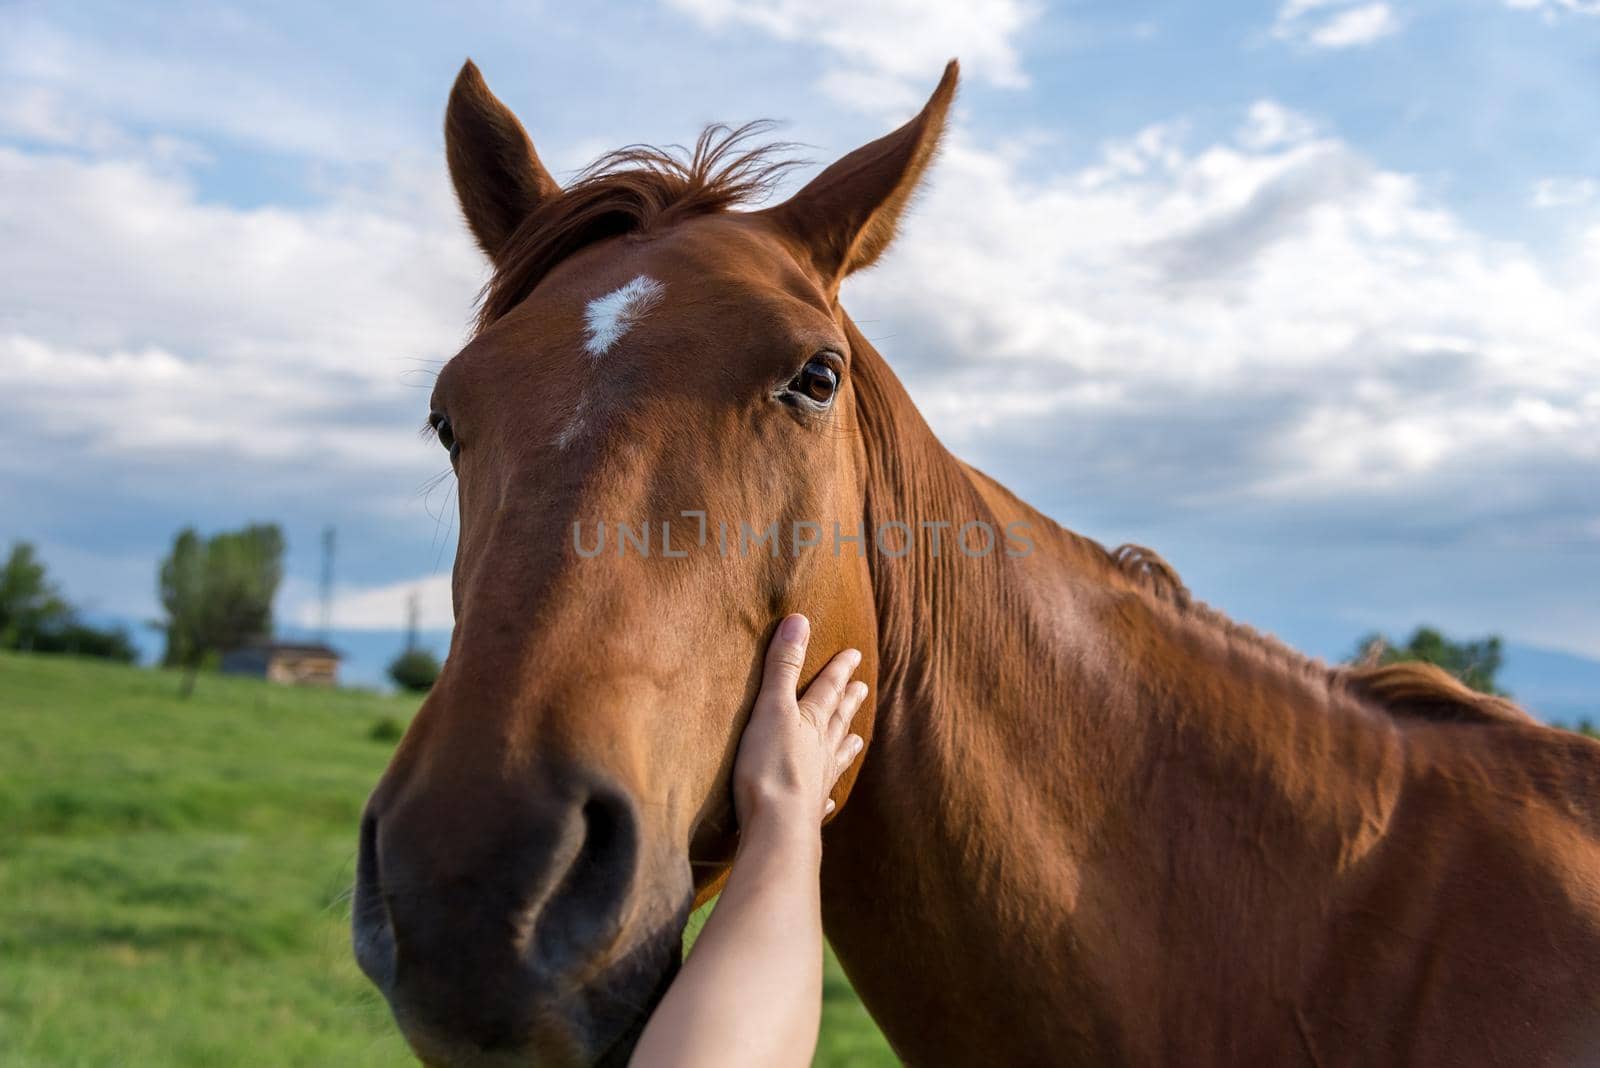 The hand of a woman is stroking a horse at sunset